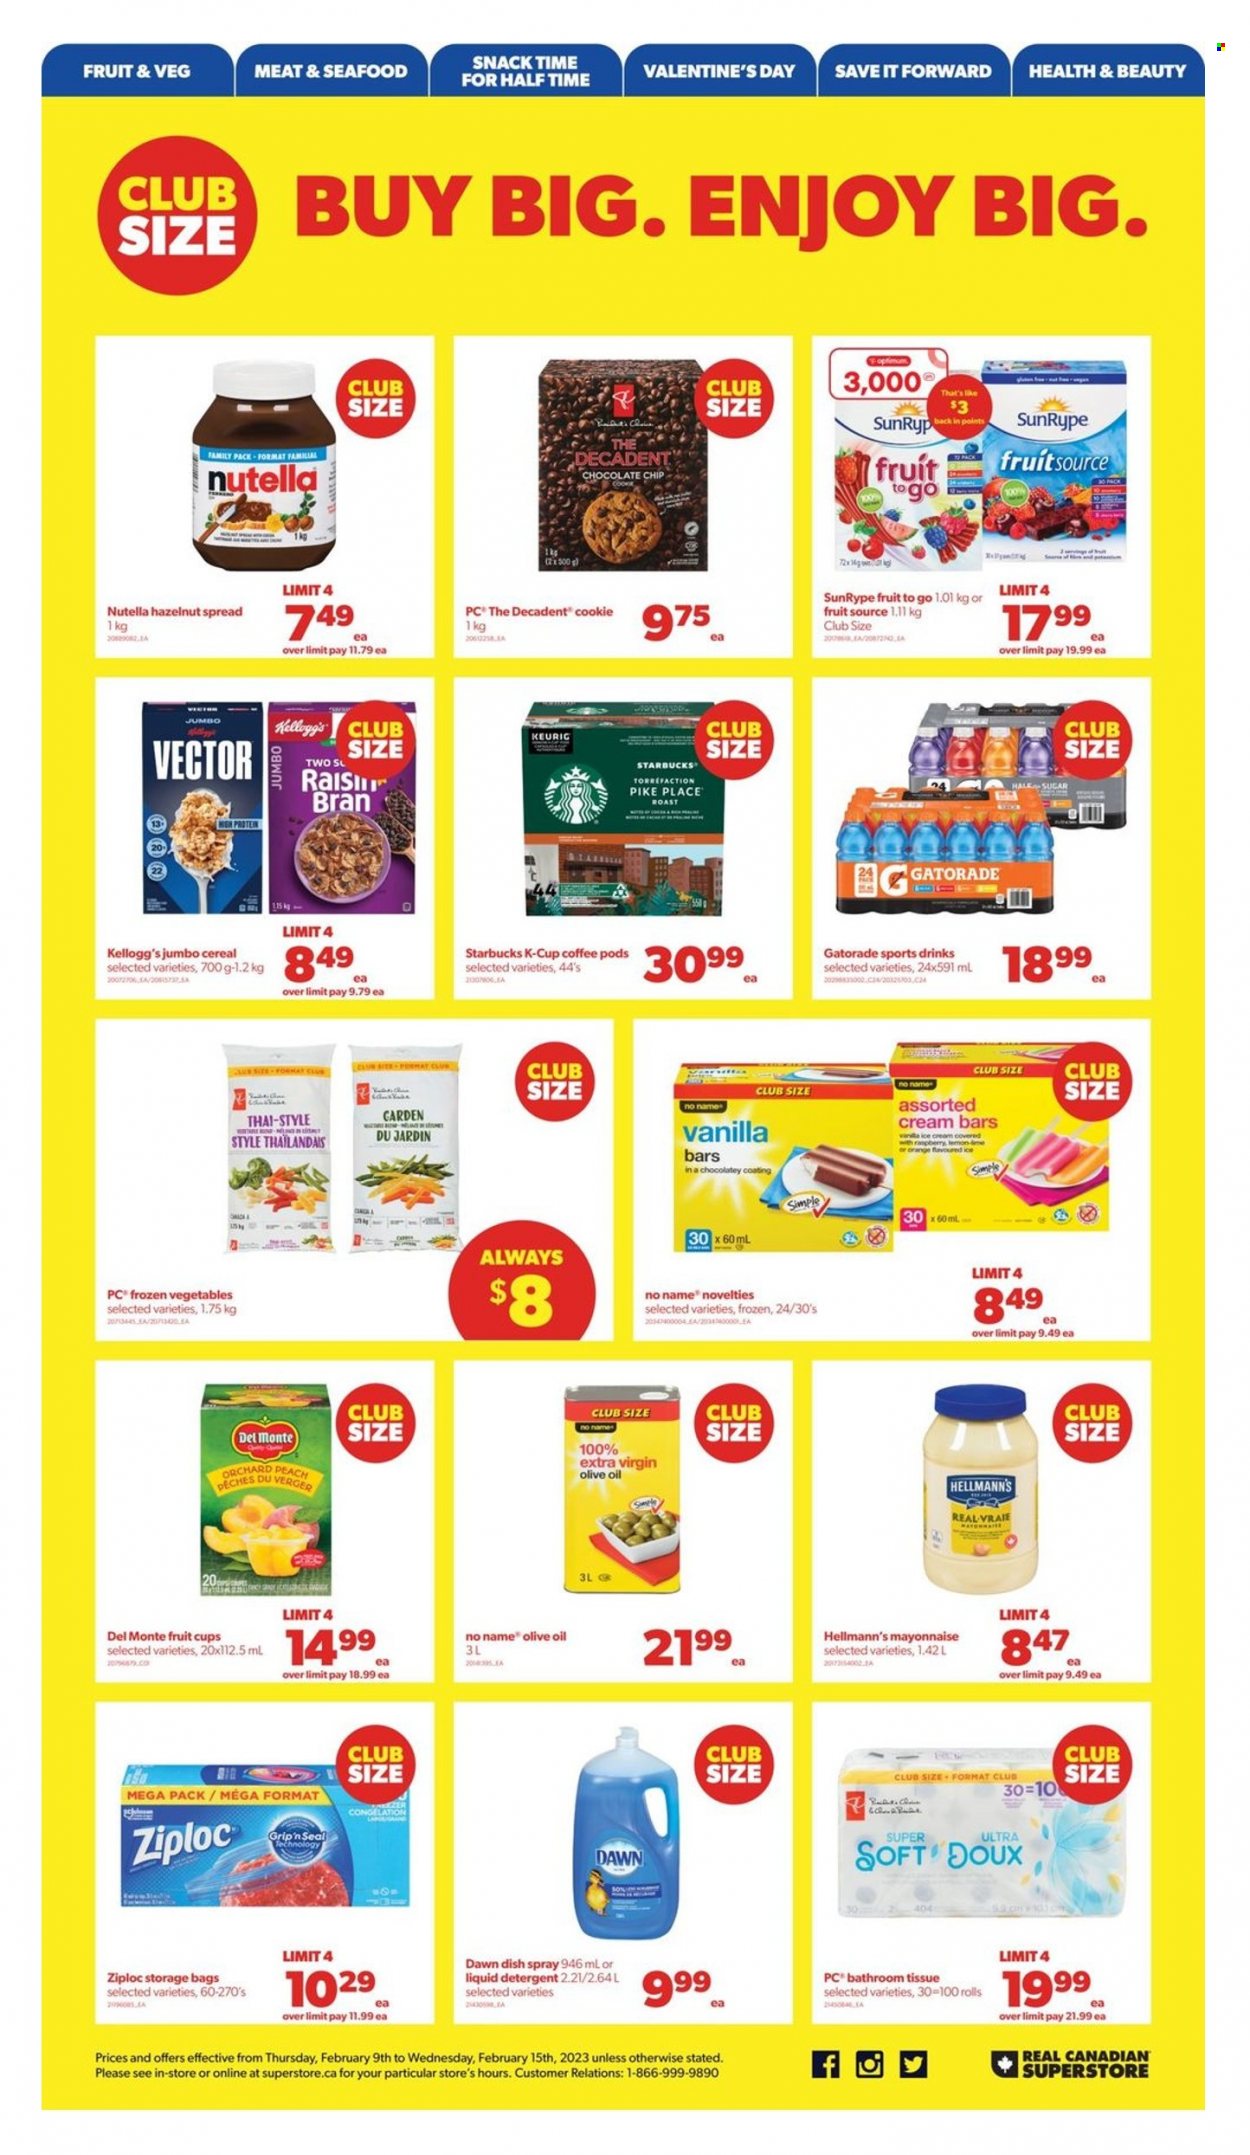 thumbnail - Real Canadian Superstore Flyer - February 09, 2023 - February 15, 2023 - Sales products - fruit cup, oranges, seafood, No Name, mayonnaise, Hellmann’s, ice cream, frozen vegetables, chocolate chips, snack, Kellogg's, sugar, Del Monte, cereals, extra virgin olive oil, olive oil, oil, hazelnut spread, Gatorade, coffee, coffee pods, coffee capsules, Starbucks, K-Cups, Keurig, bath tissue, liquid detergent, bag, Ziploc, storage bag, Optimum, detergent, Nutella. Page 13.